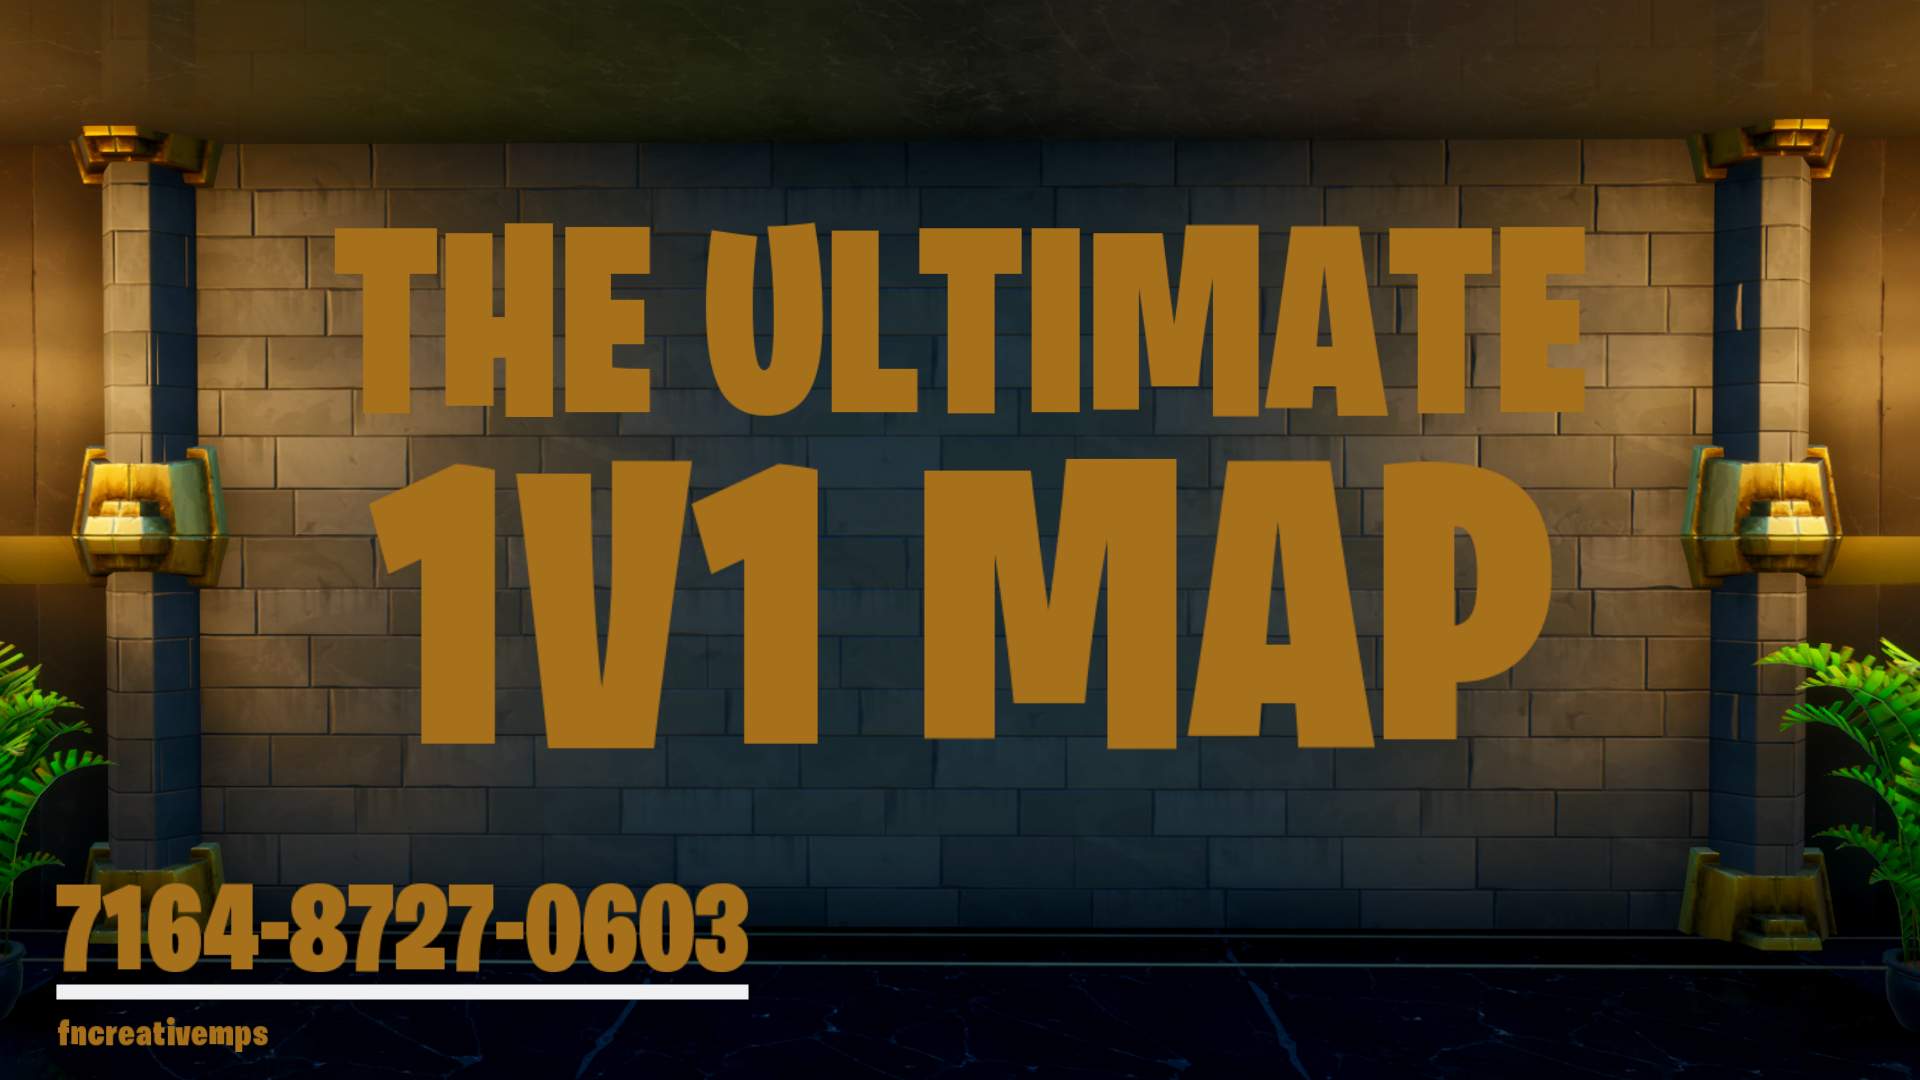 THE ULTIMATE 1V1 MAP